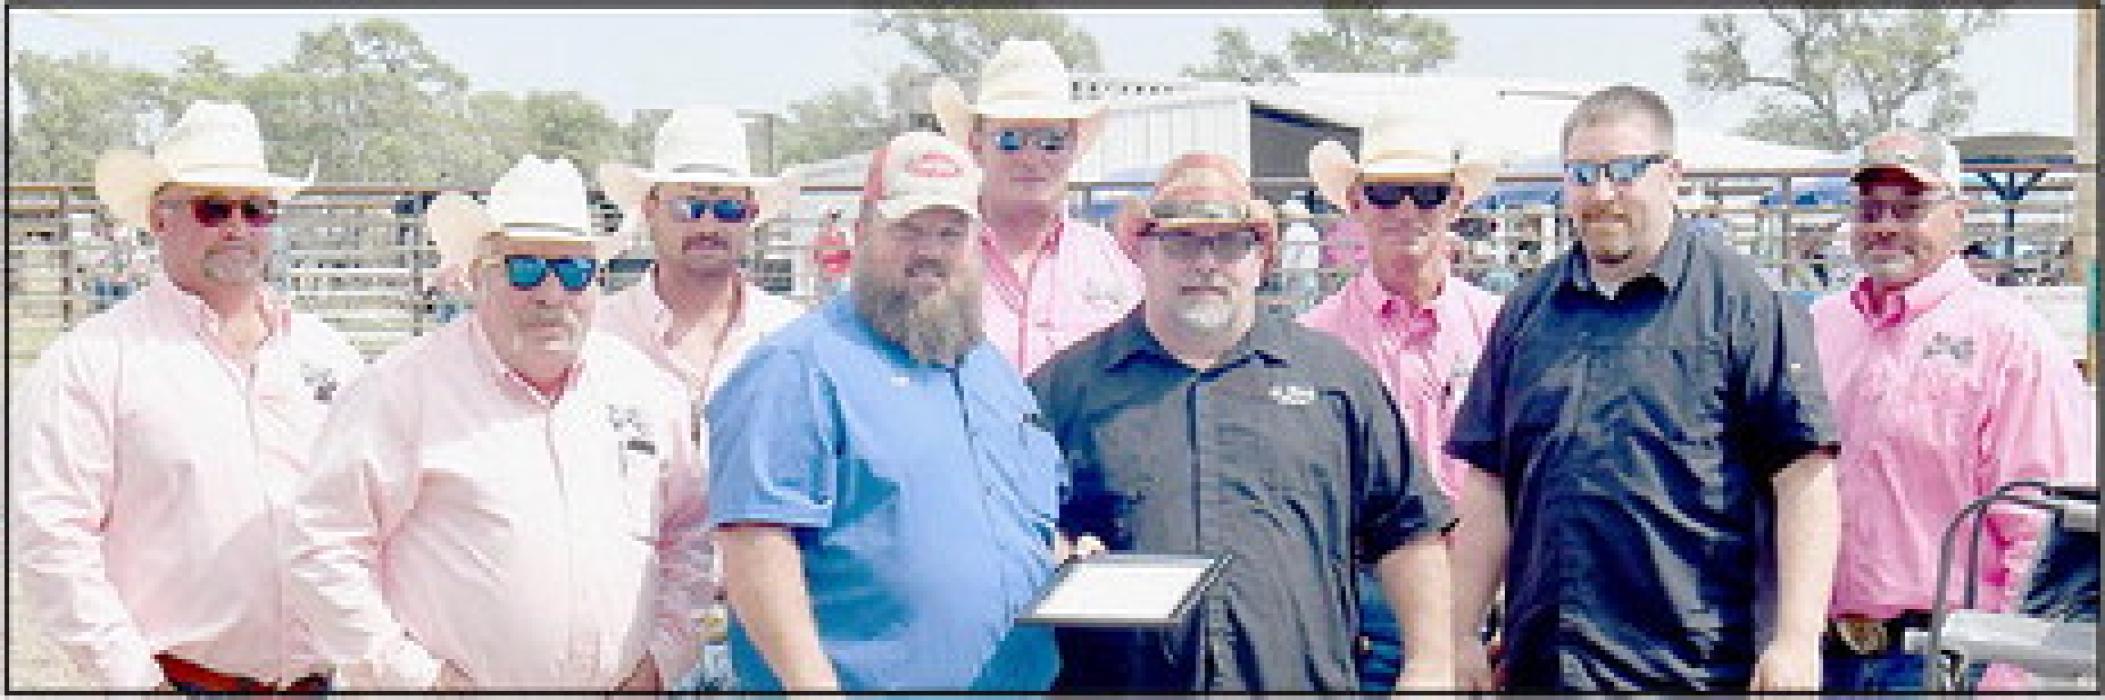 Each year the Brown County Fair Board selects a Business of the Year. The board selects a business that has shown great support for the Brown County Fair and Rodeo. The 2023 Business of the Year was 1st Class Auto, represented by owners Clint Painter and Tony Buckles.